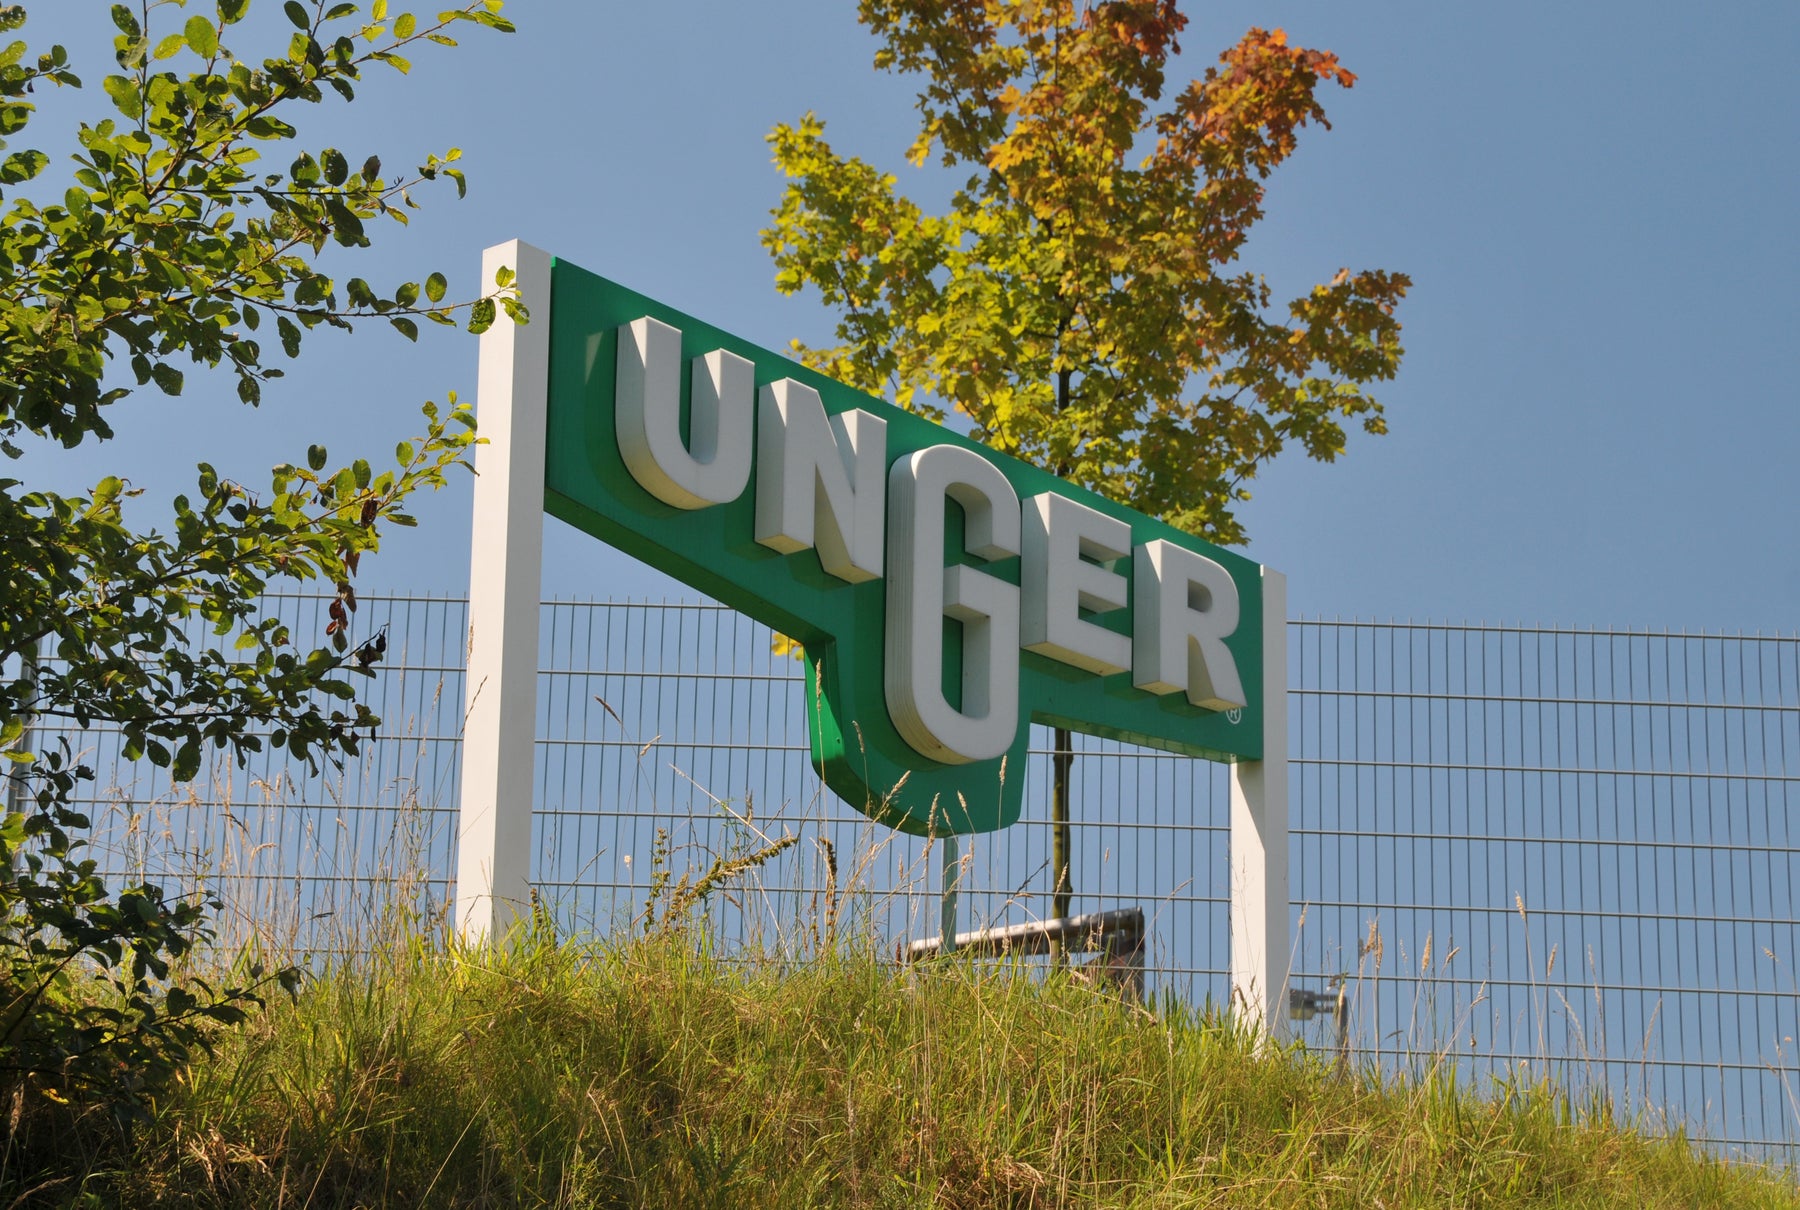 Unger - From Humble Beginnings To Worldwide Success